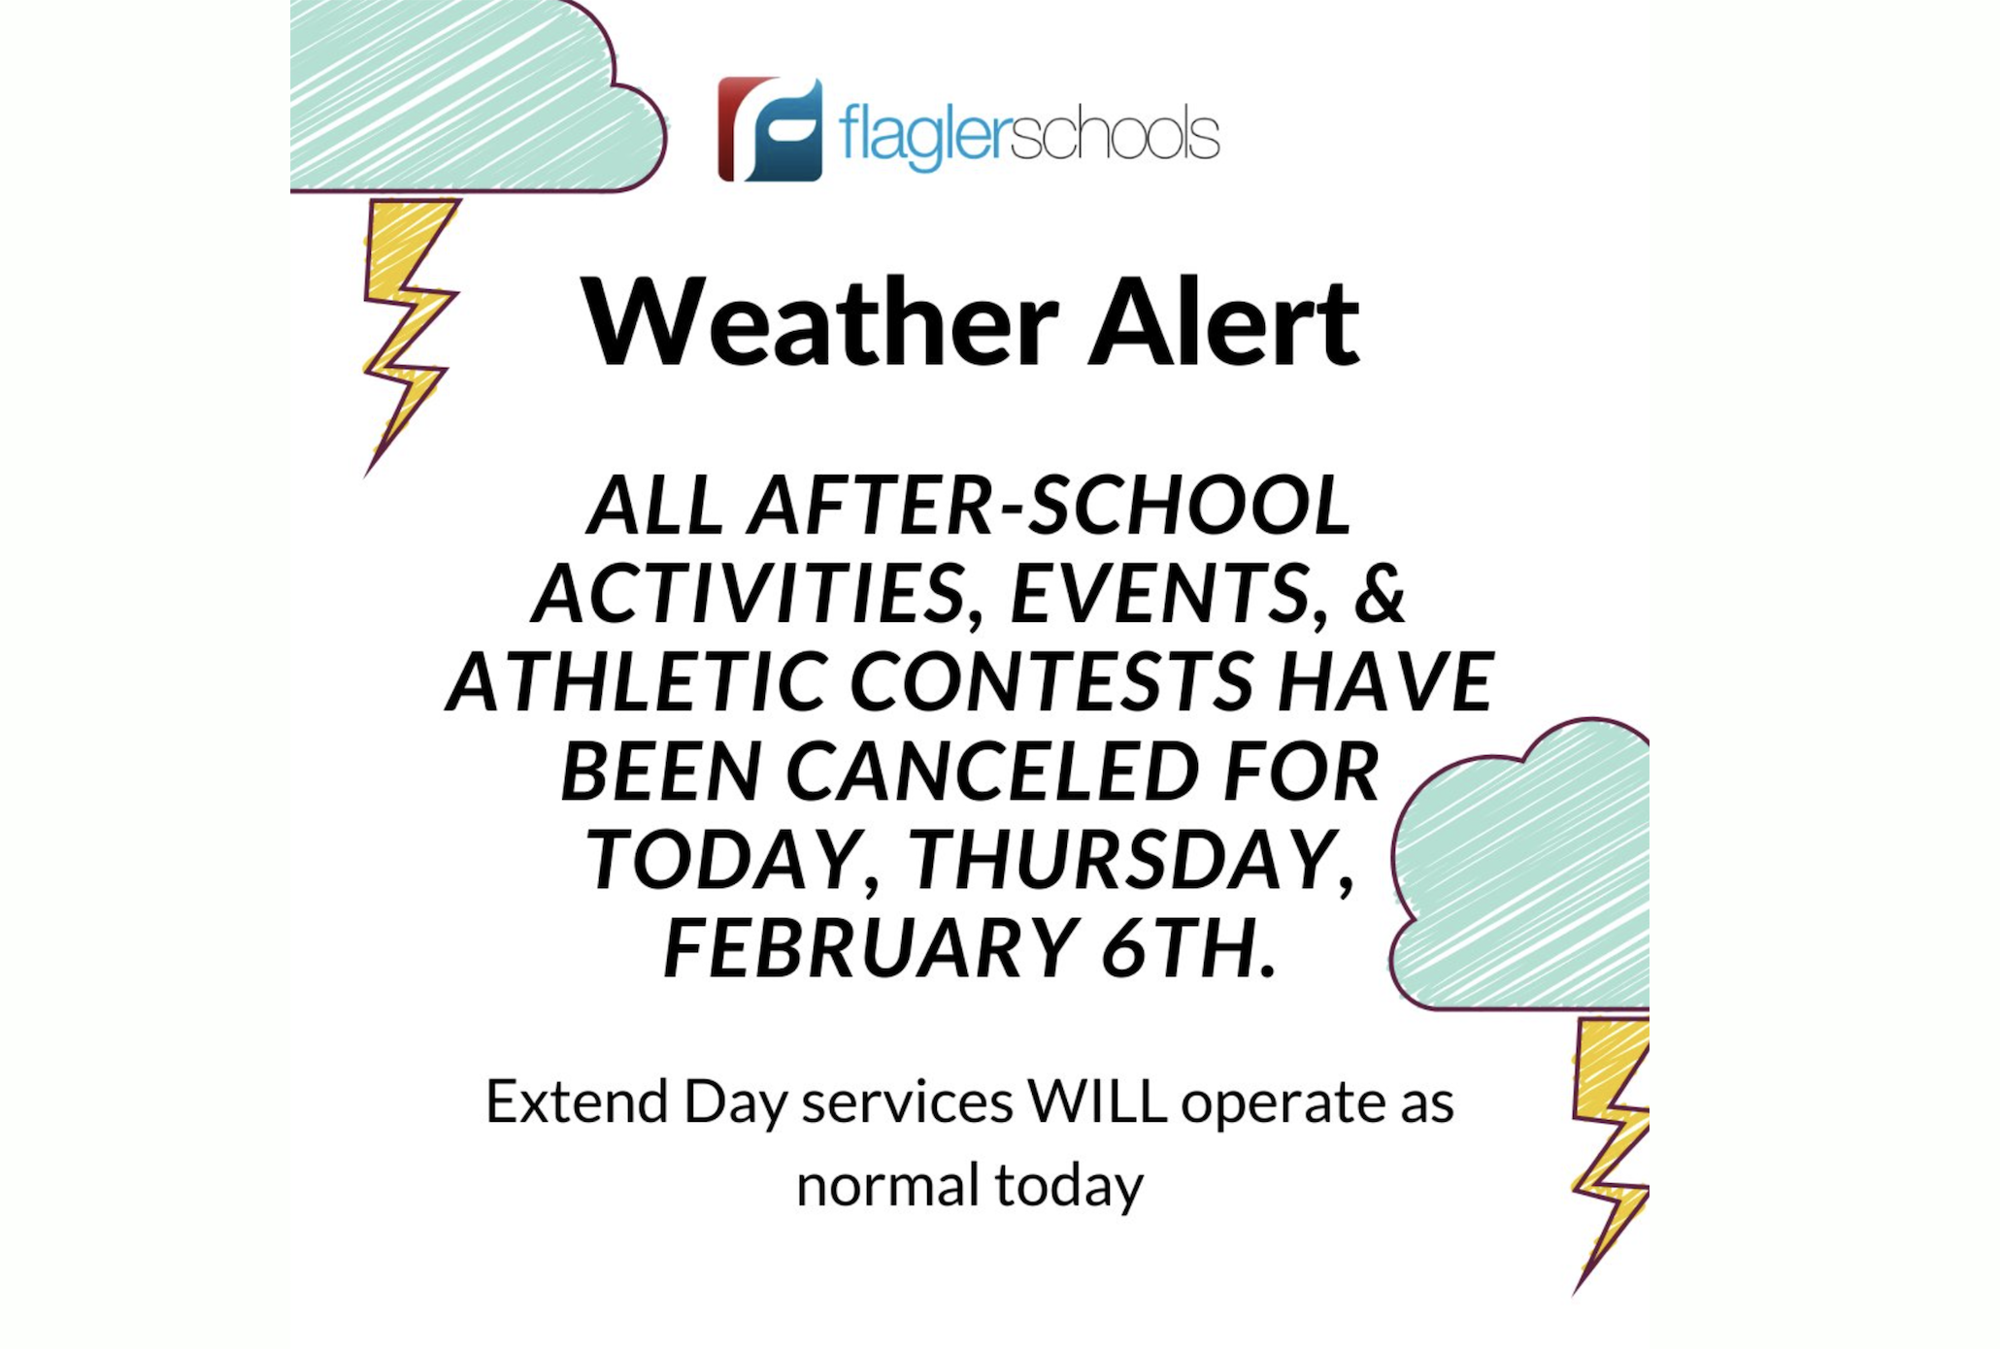 The Flagler County School District posted this image to its official Twitter feed on Feb. 6.